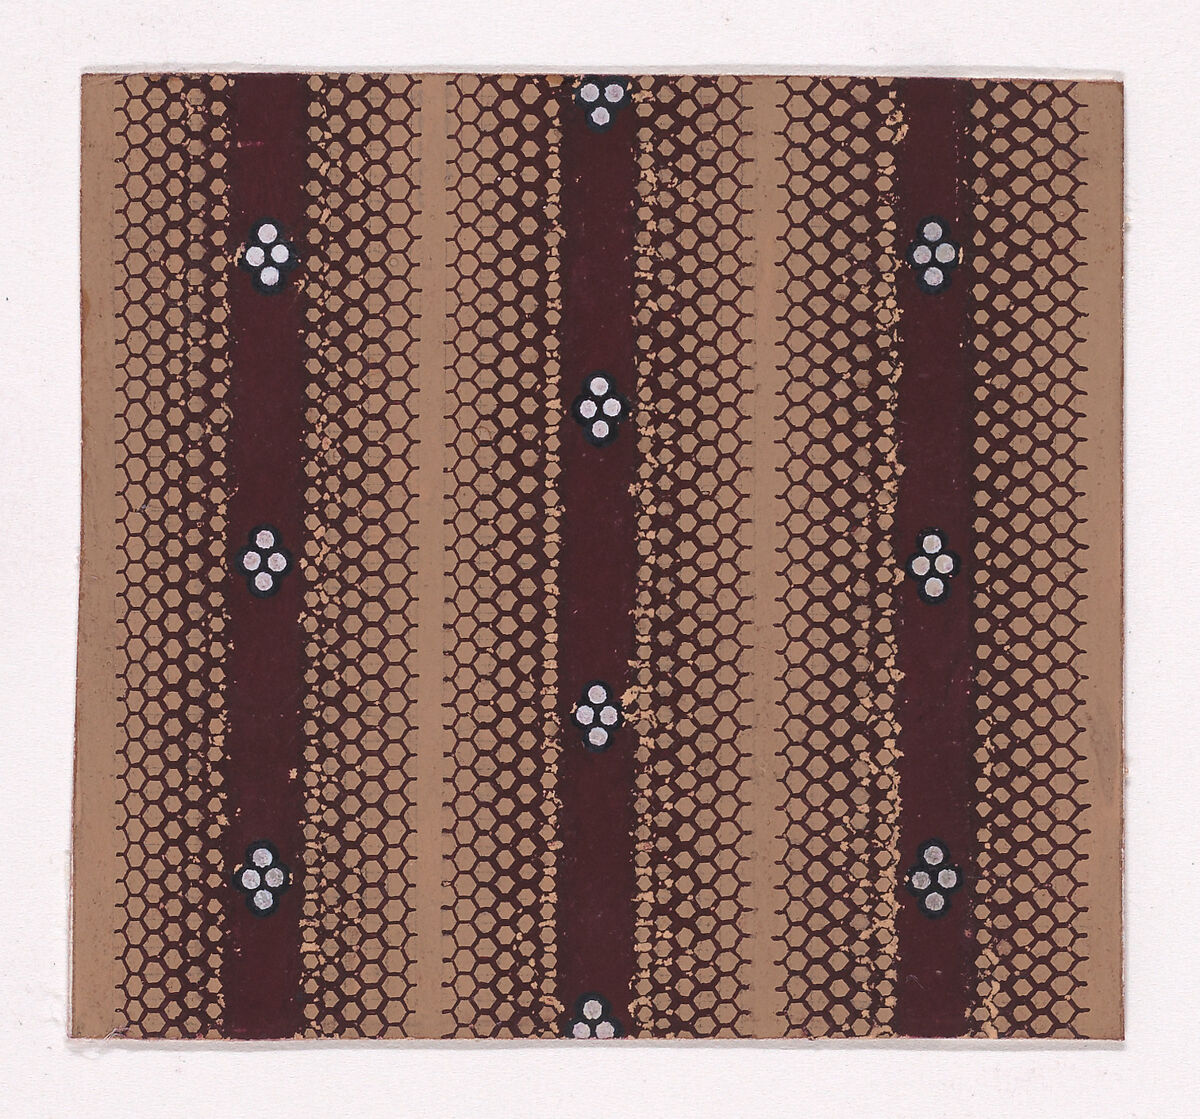 Textile Design with Vertical Stripes Decorated with Quatrefoils of Pearls and with Offsetting Honeycomb Patterns, Anonymous, Alsatian, 19th century, Gouache 